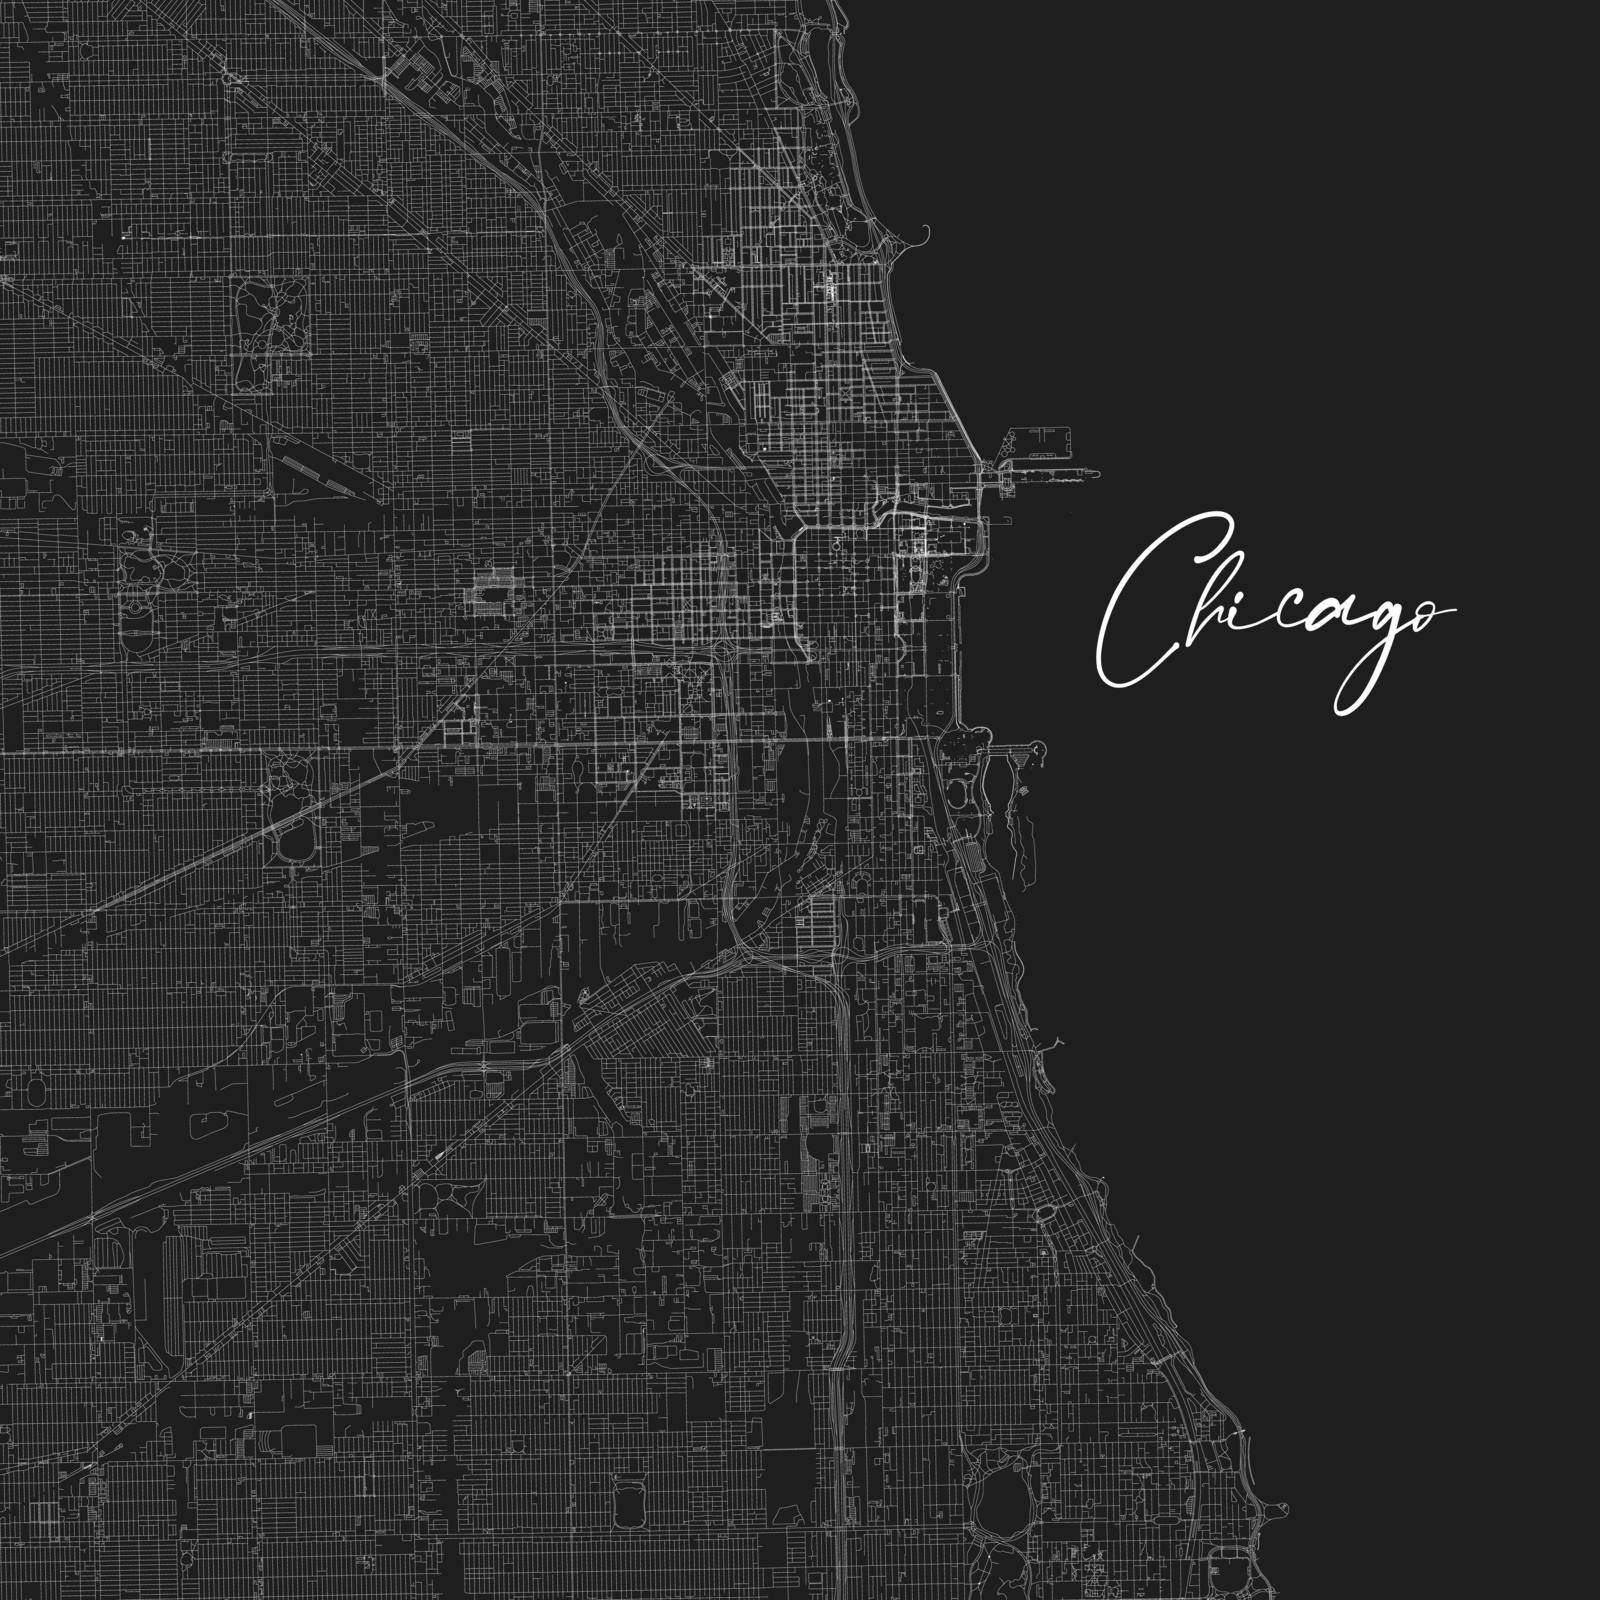 Black vector Chicago, Illinois map with City name. Art print template for decoration. Black and white. Stock vector illustration isolated by Kyrylov